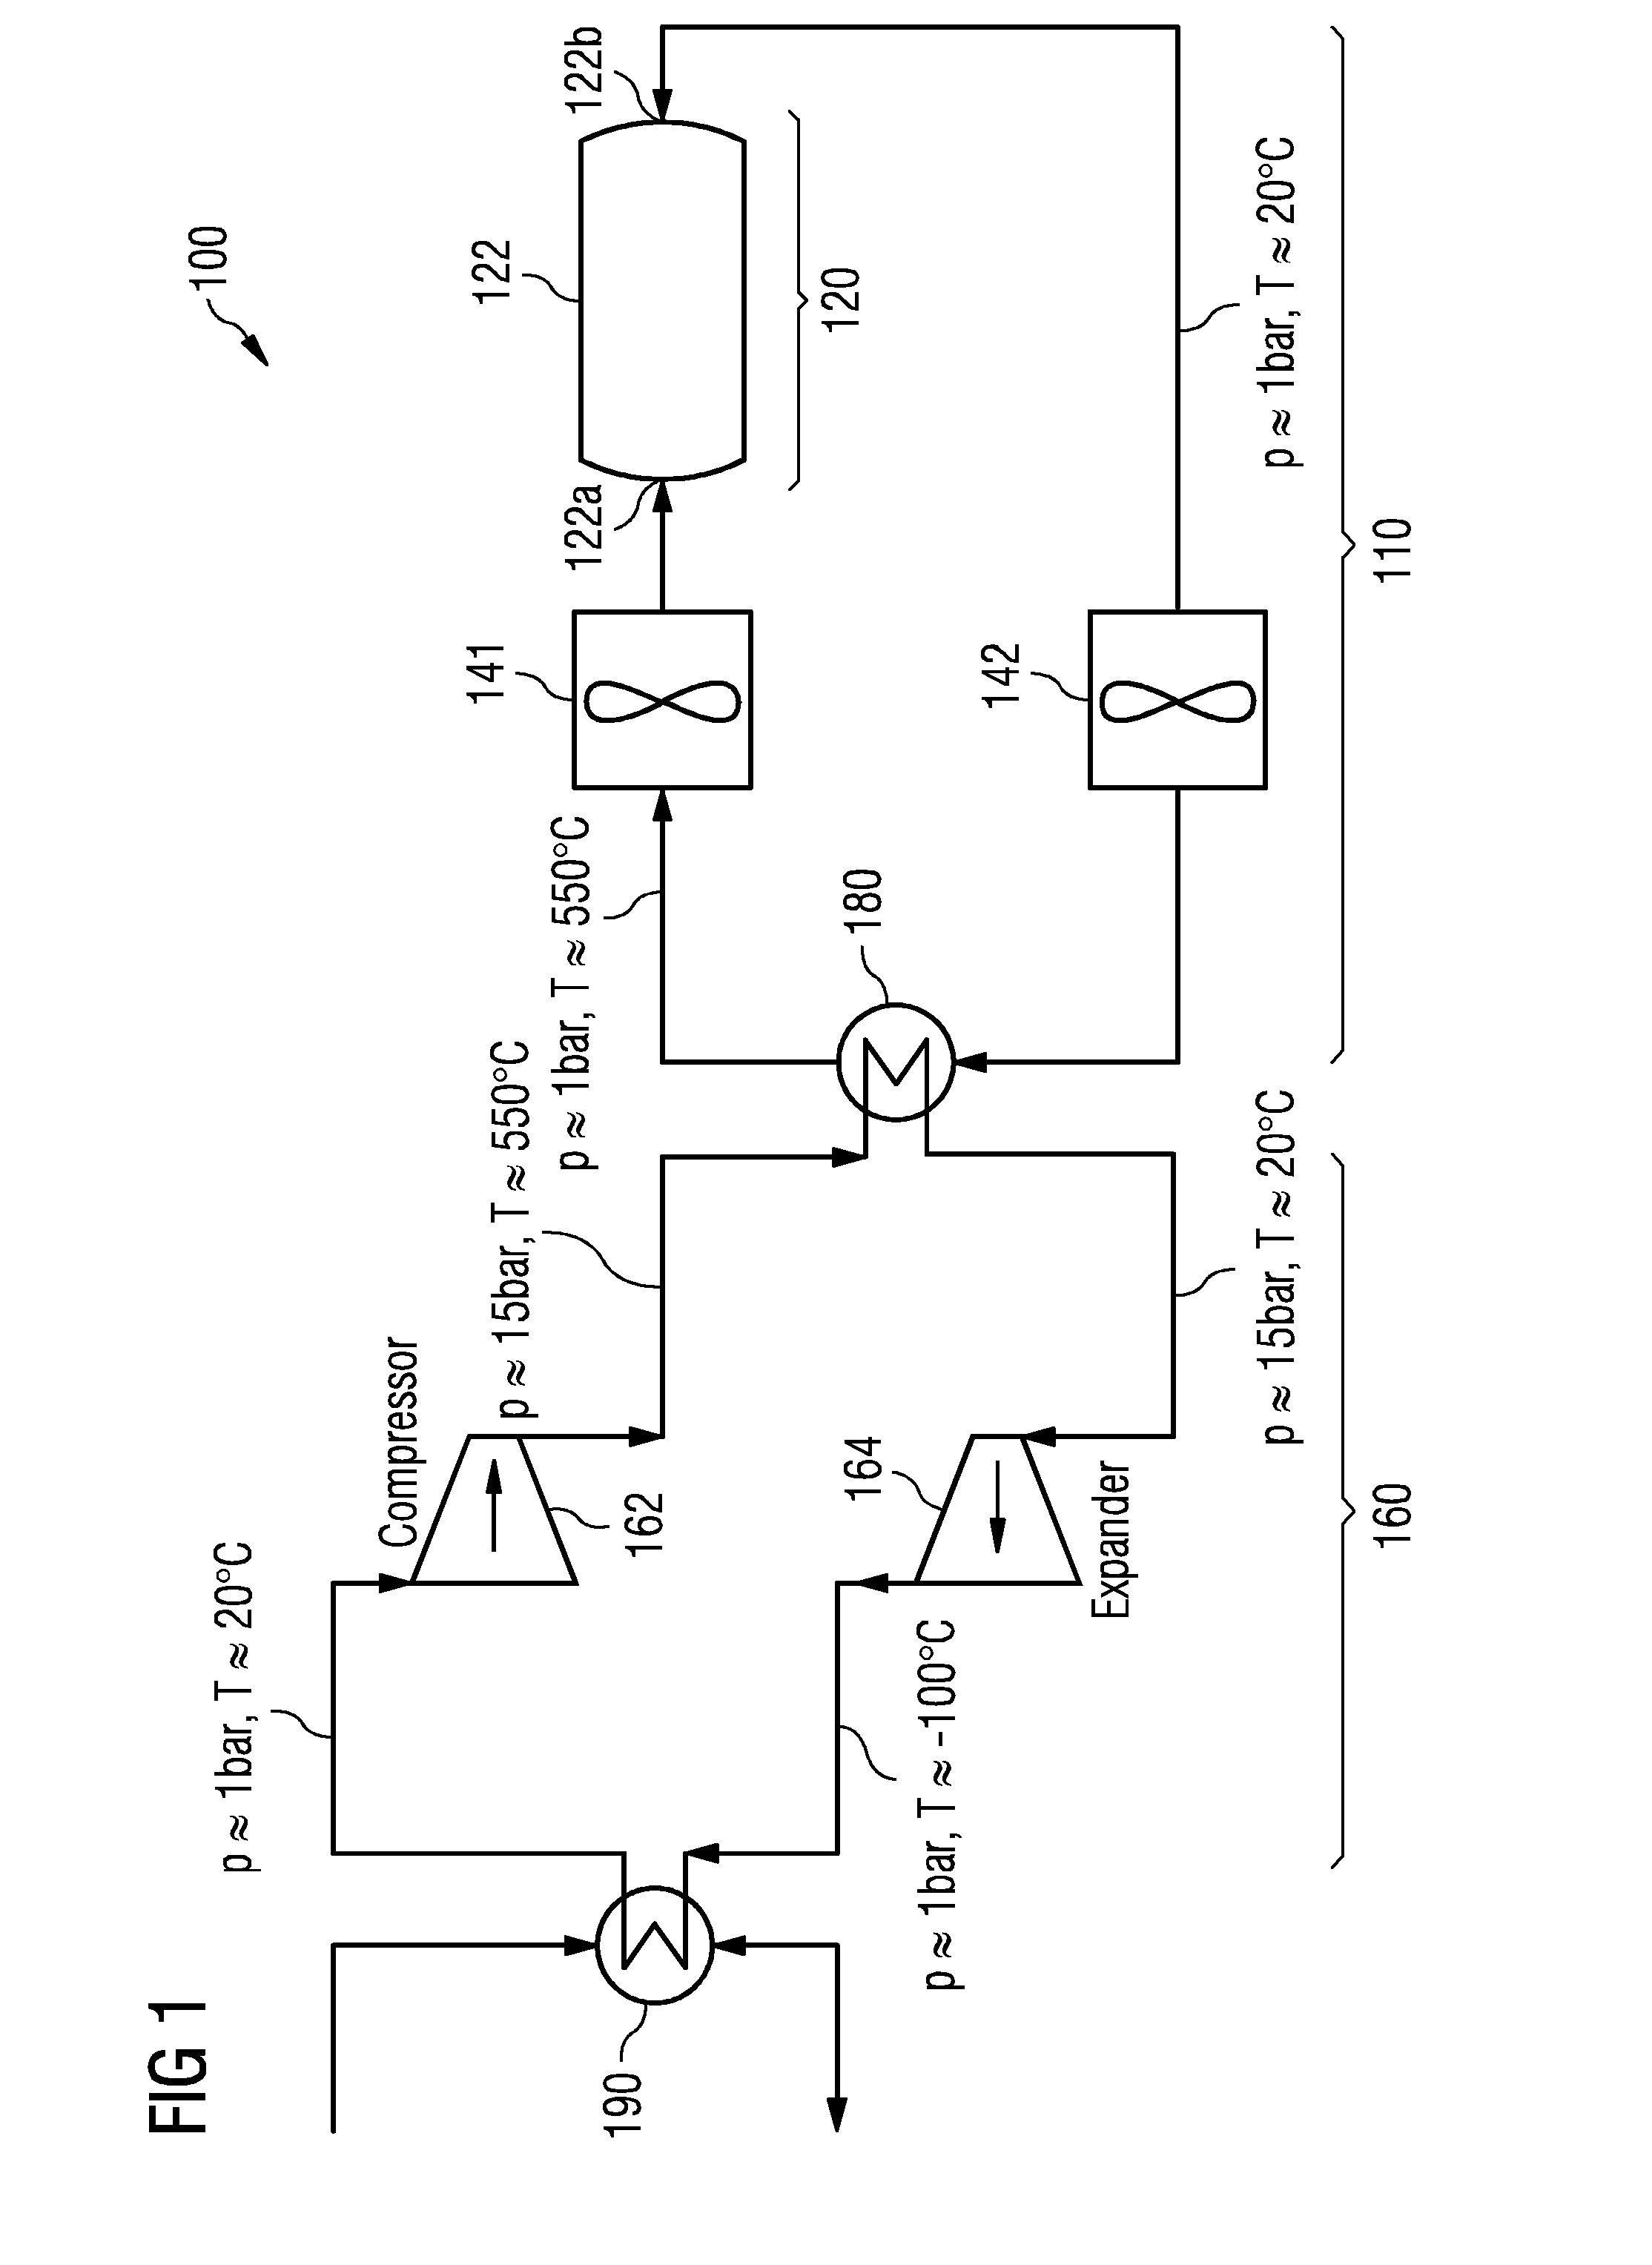 Thermal energy storage and recovery system comprising a storage arrangement and a charging/discharging arrangement being connected via a heat exchanger